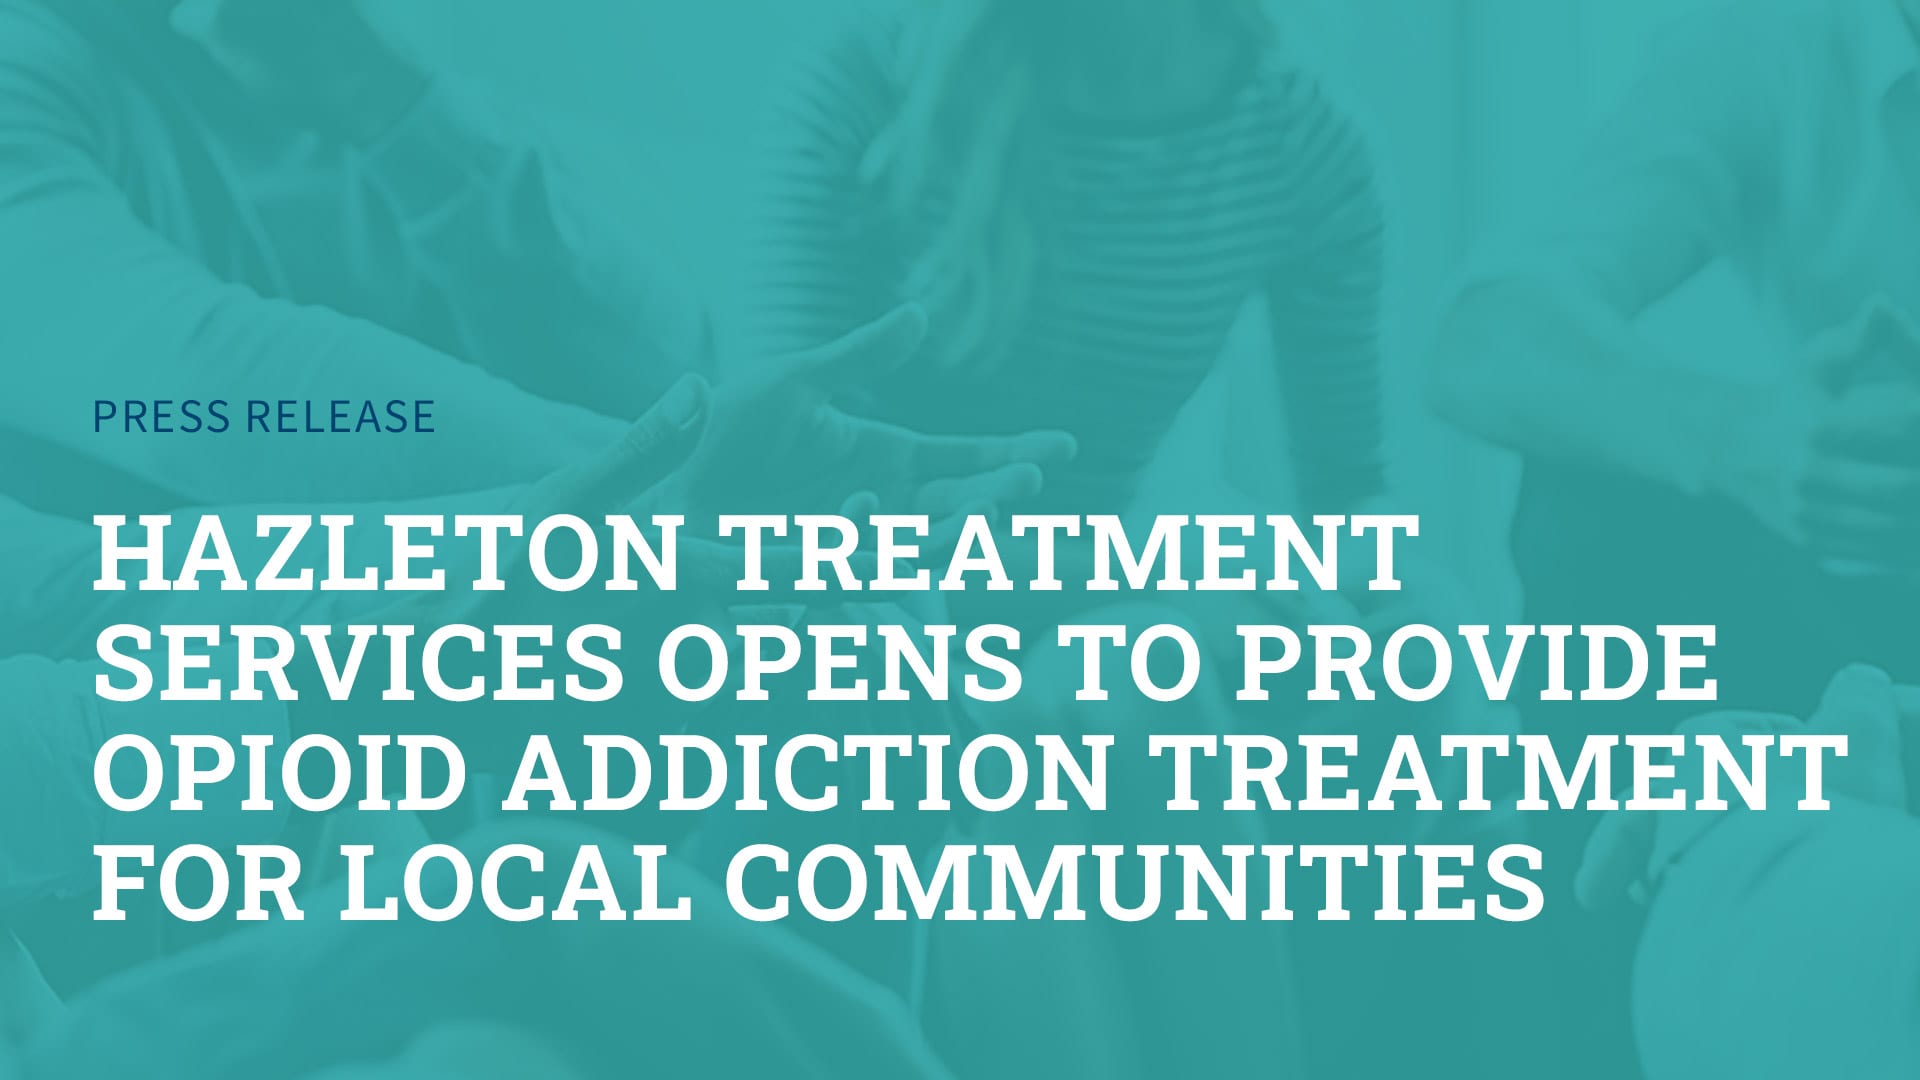 Hazleton Treatment Services opens to provide opioid addiction treatment for local communities